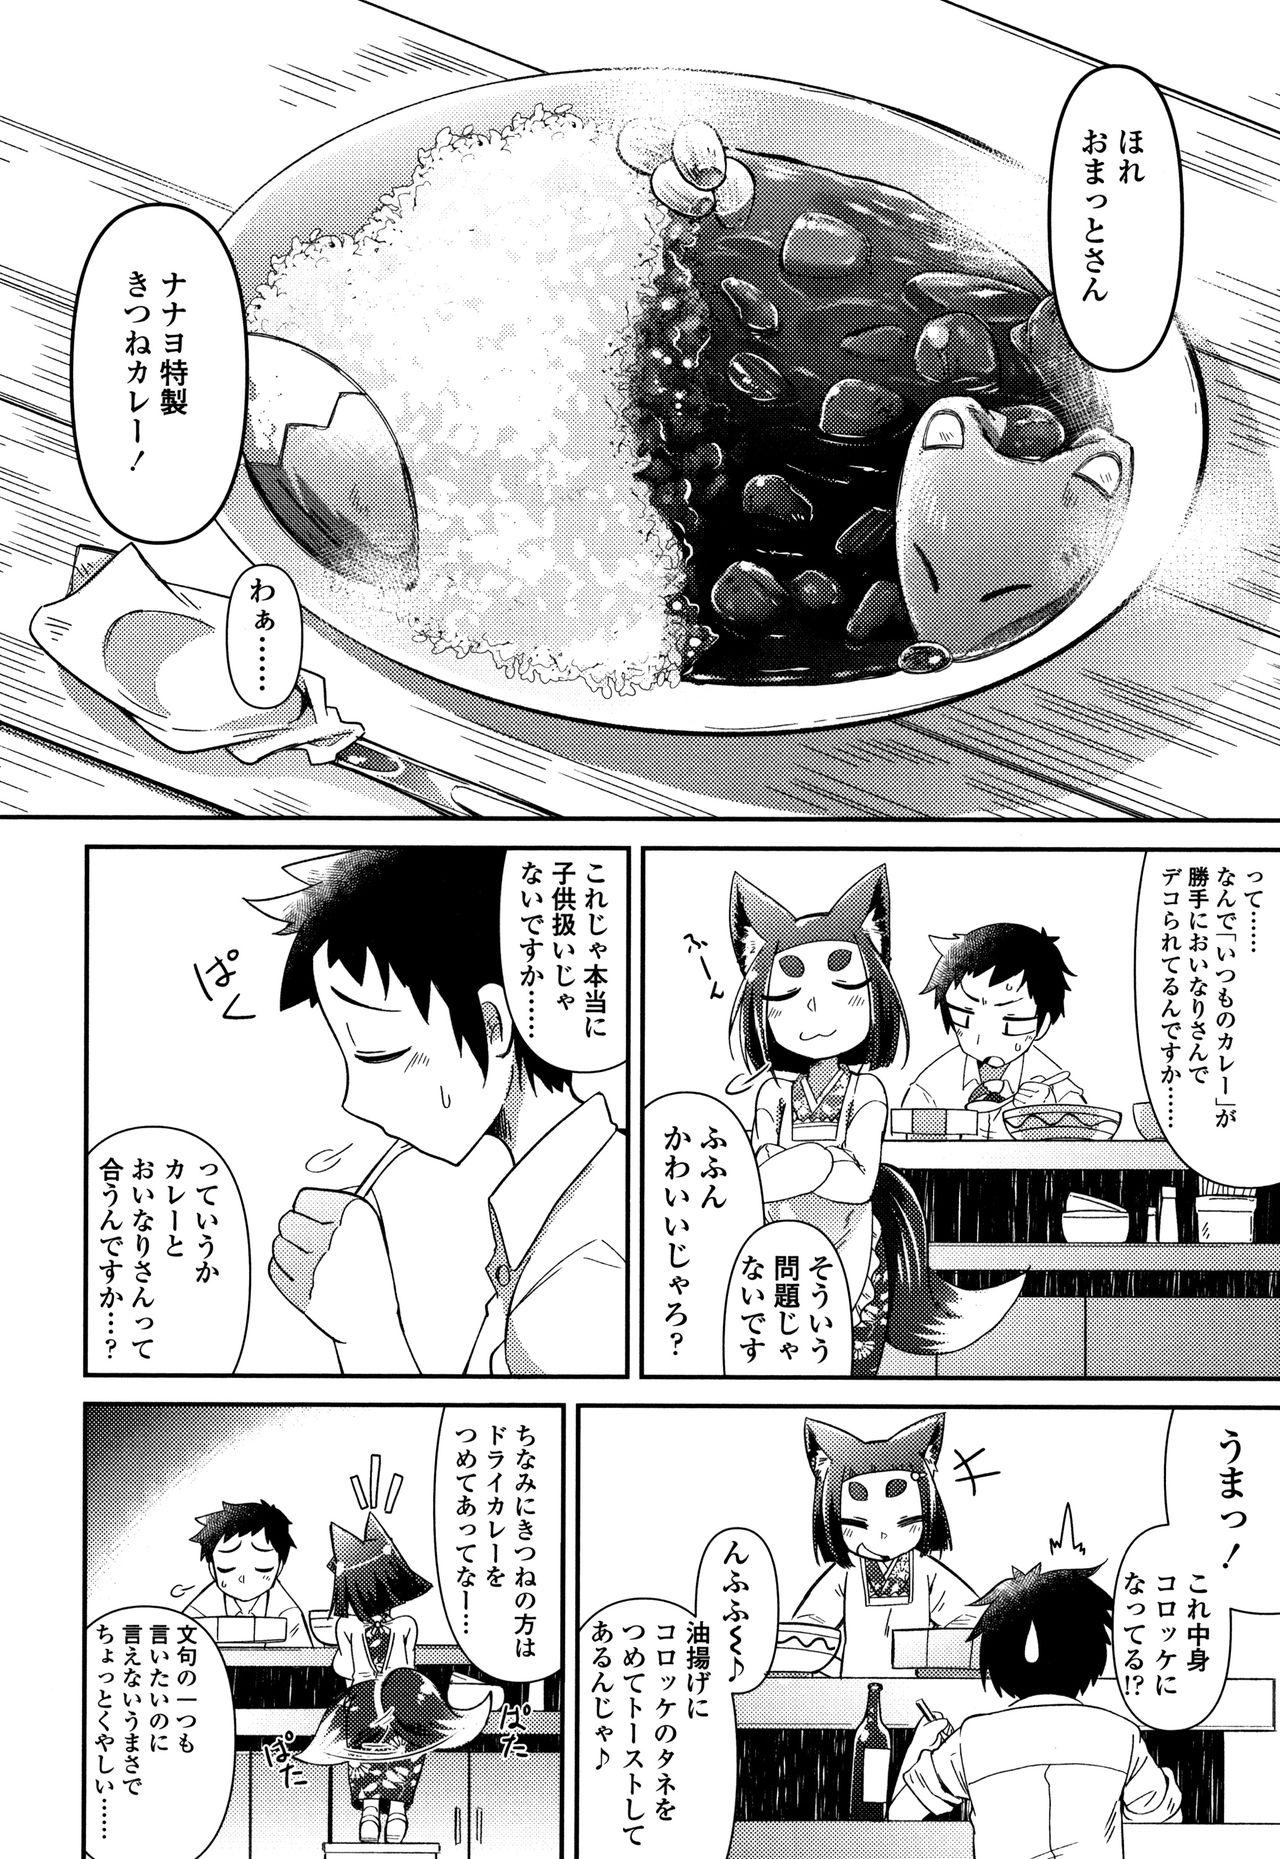 Deutsch Youkai Koryouriya ni Youkoso - Welcome to apparition small restaurant Gets - Page 11